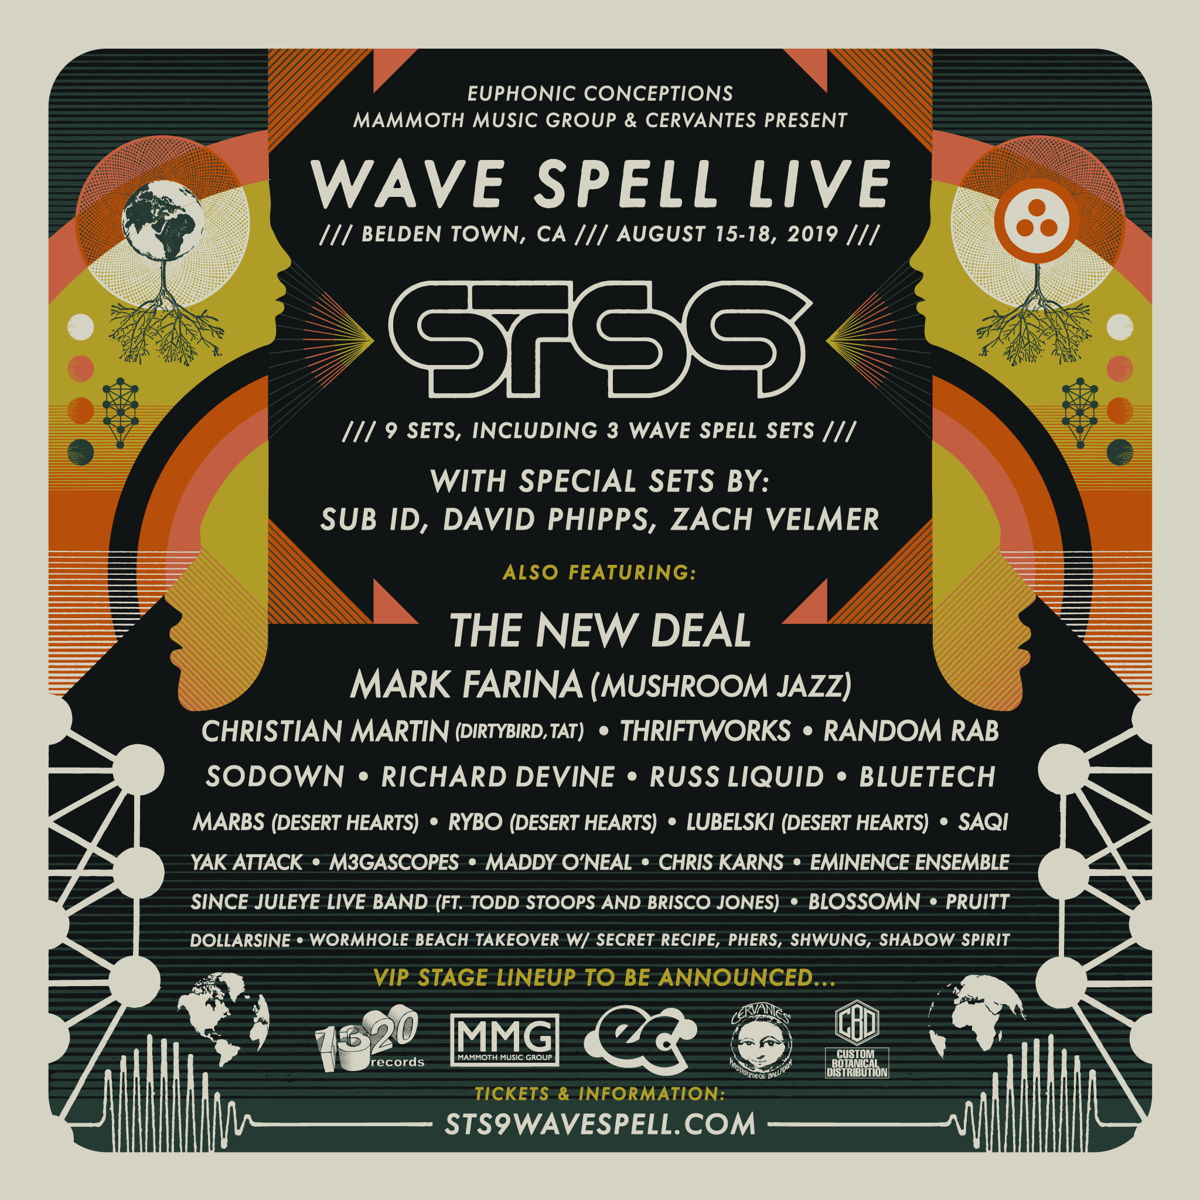 Wave Spell Live is Getting Bigger and Better in 2019